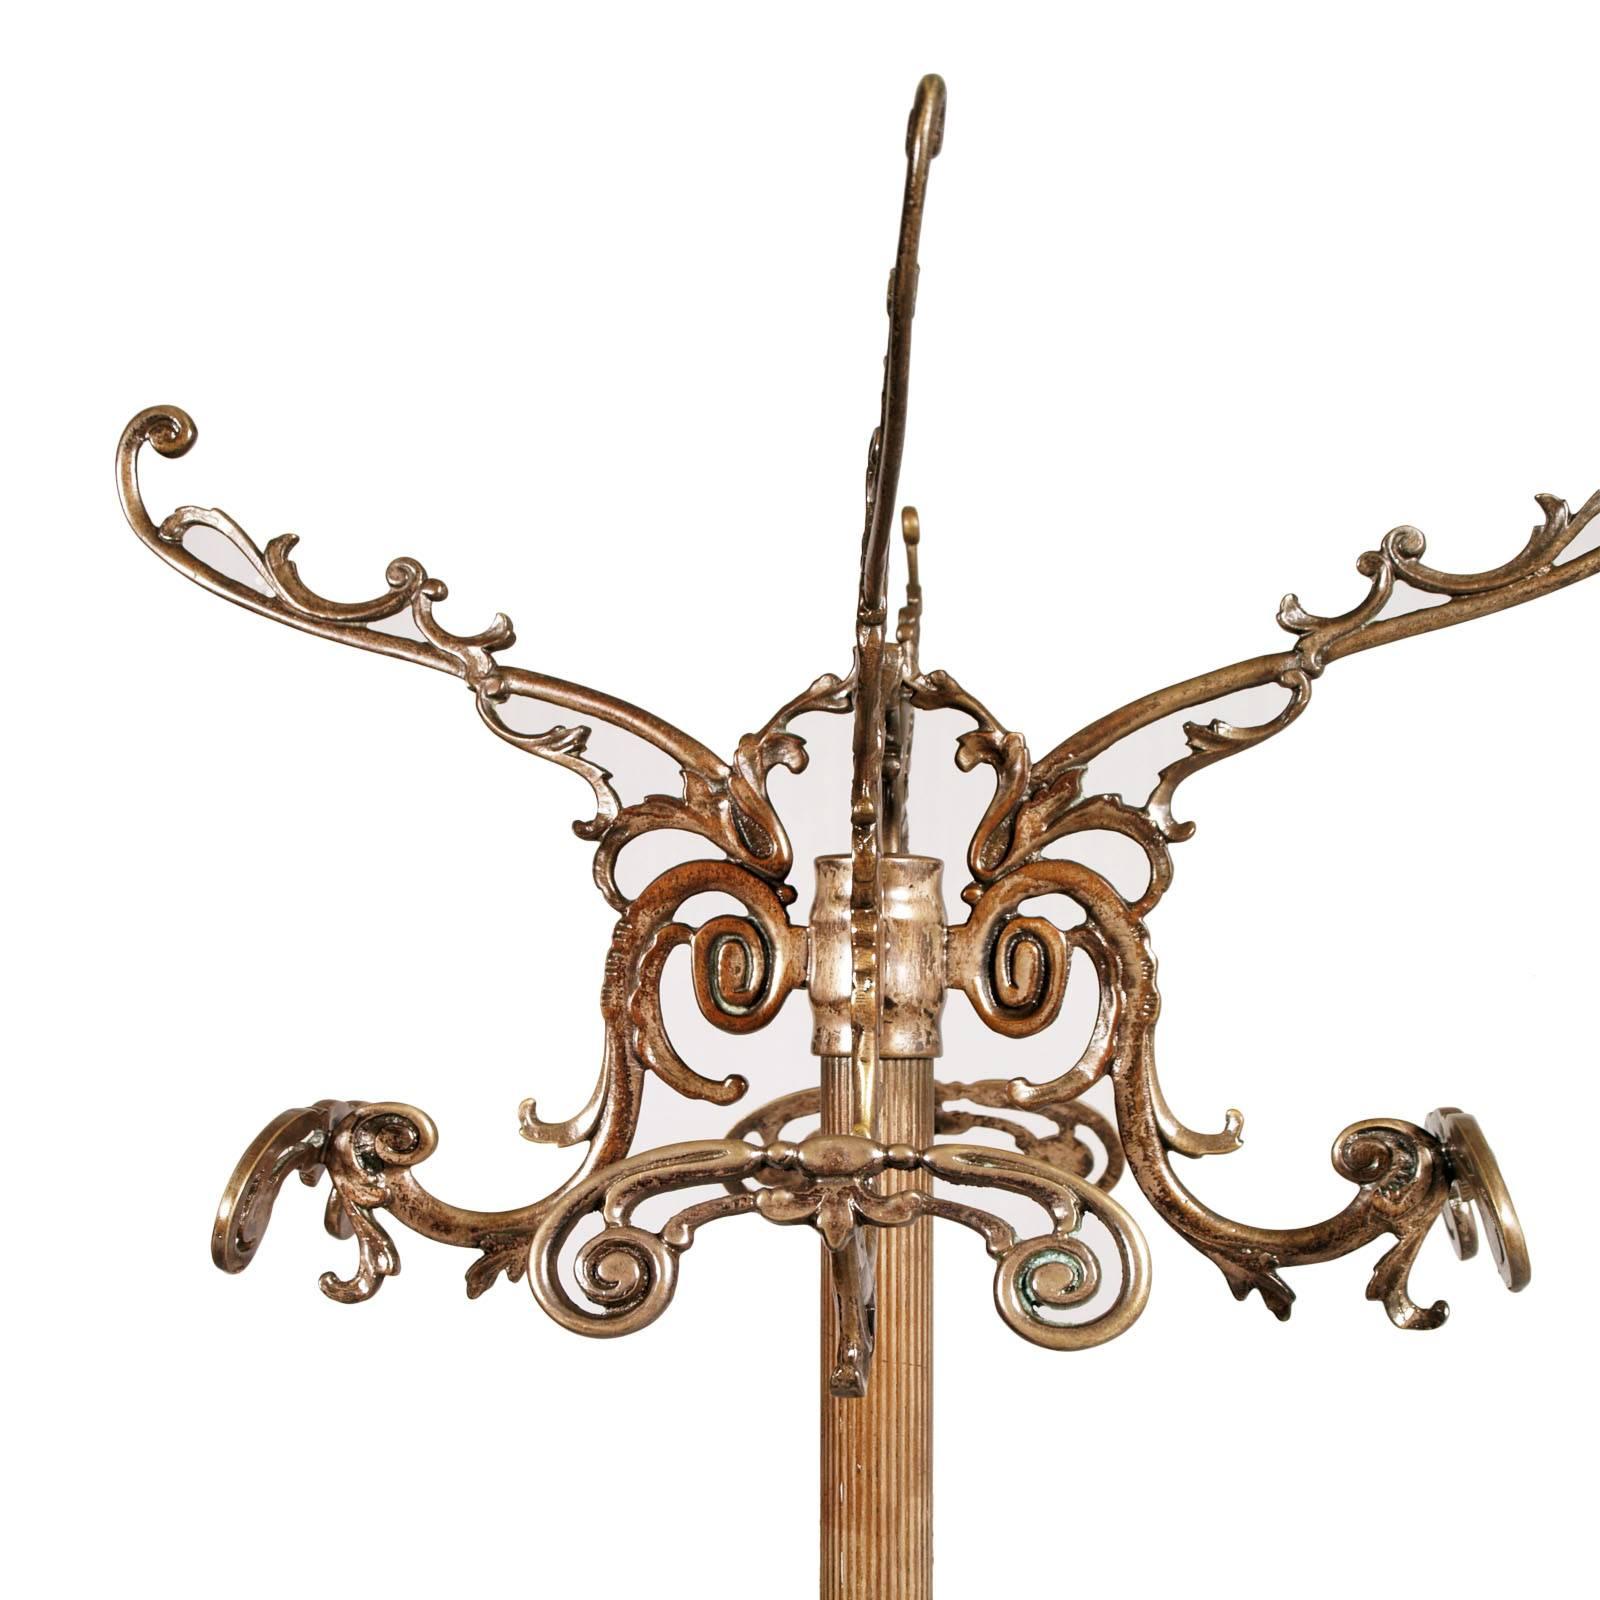 Bronze and brass burnished Art Nouveau Belle Époque Hanger with Grifone feet in molten bronze.
Glamorous figures and volute characteristics of the Belle Époque period

Measures cm: H 175 x D. 55.